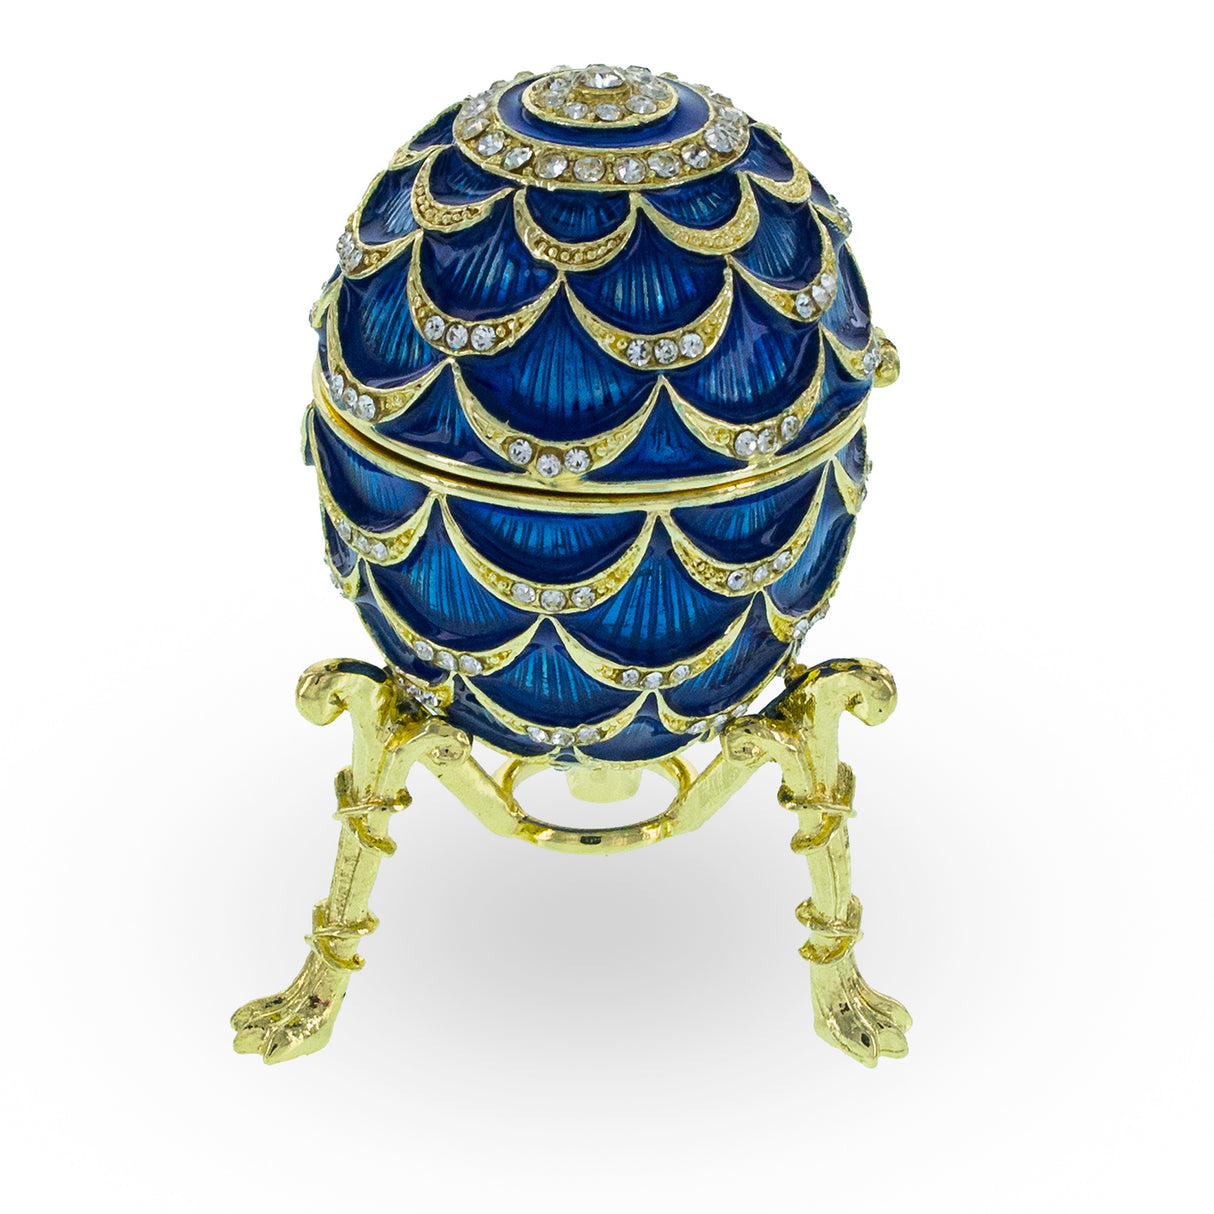 Shop Blue Enamel Pinecone Royal Inspired Imperial Easter Egg with Clock. Pewter Royal Royal Eggs Inspired for Sale by Online Gift Shop BestPysanky